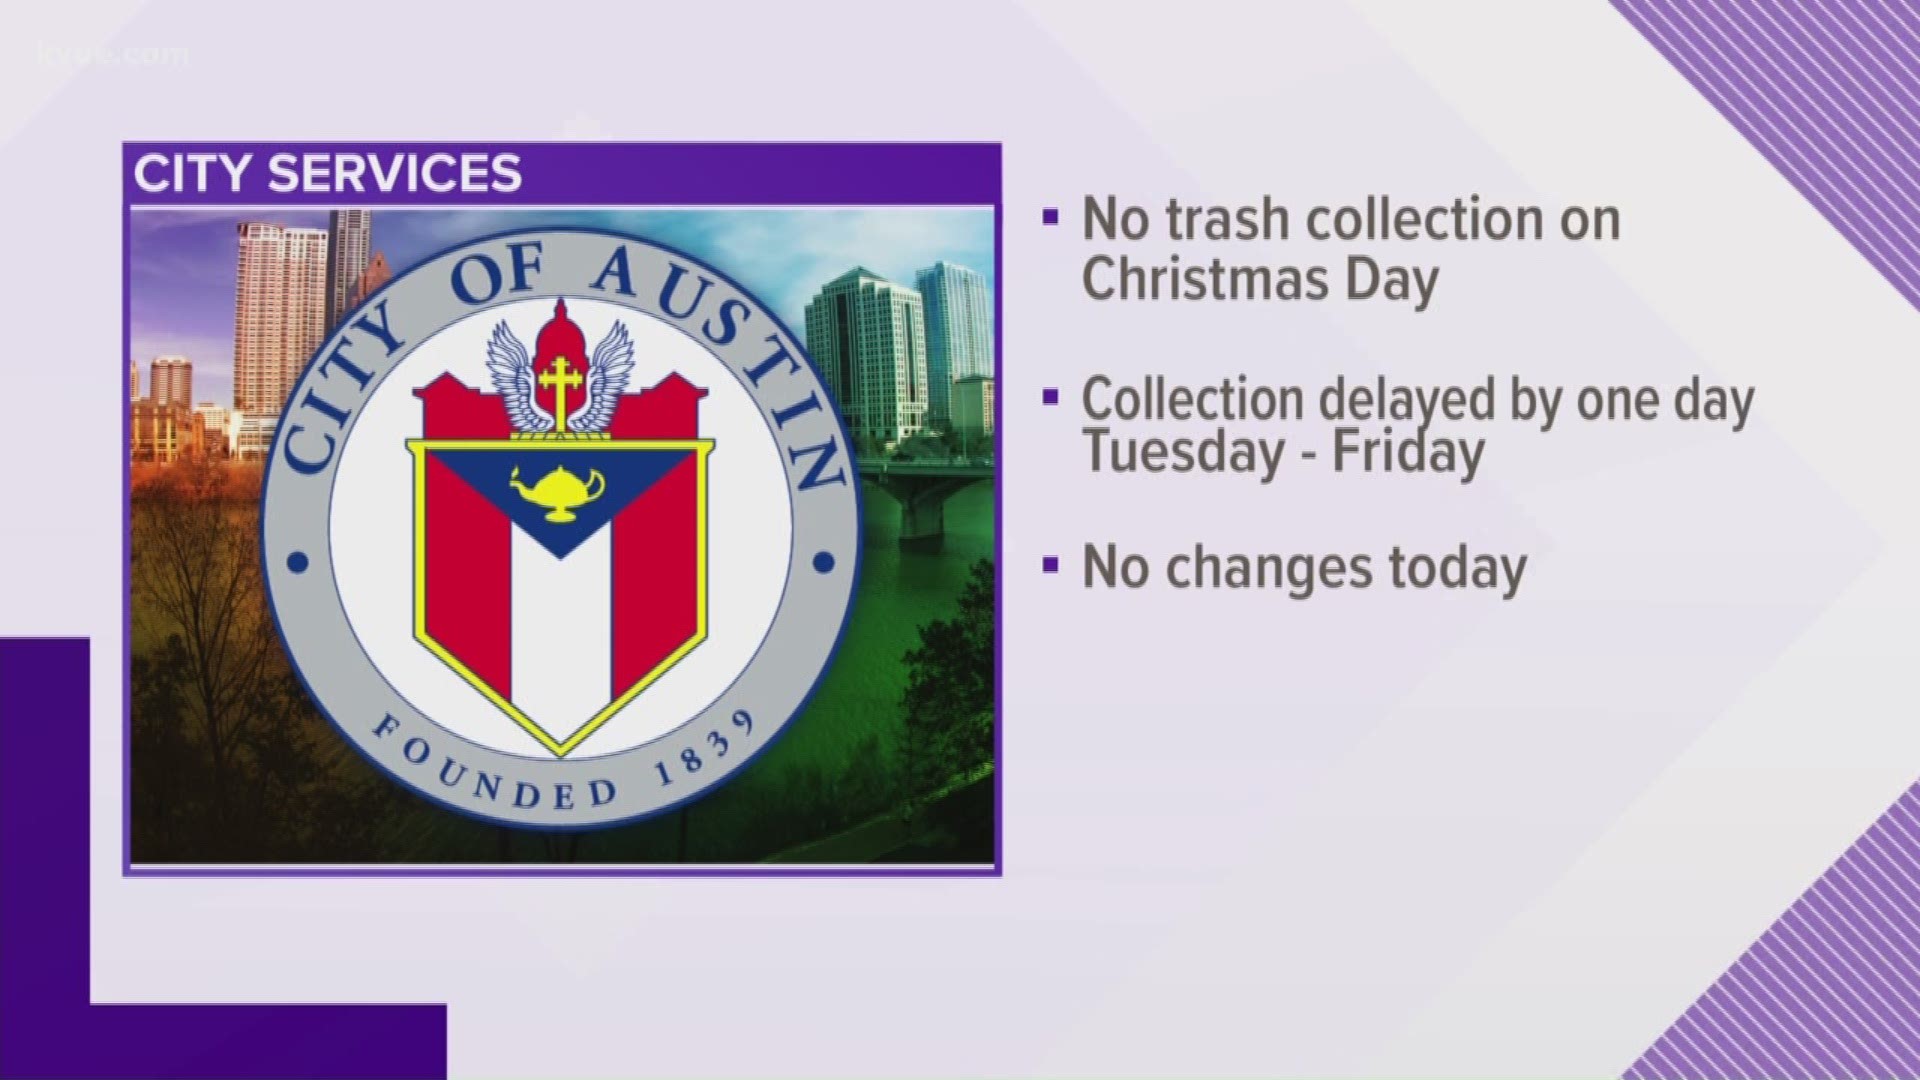 City crews will not be picking up trash on Christmas Day.